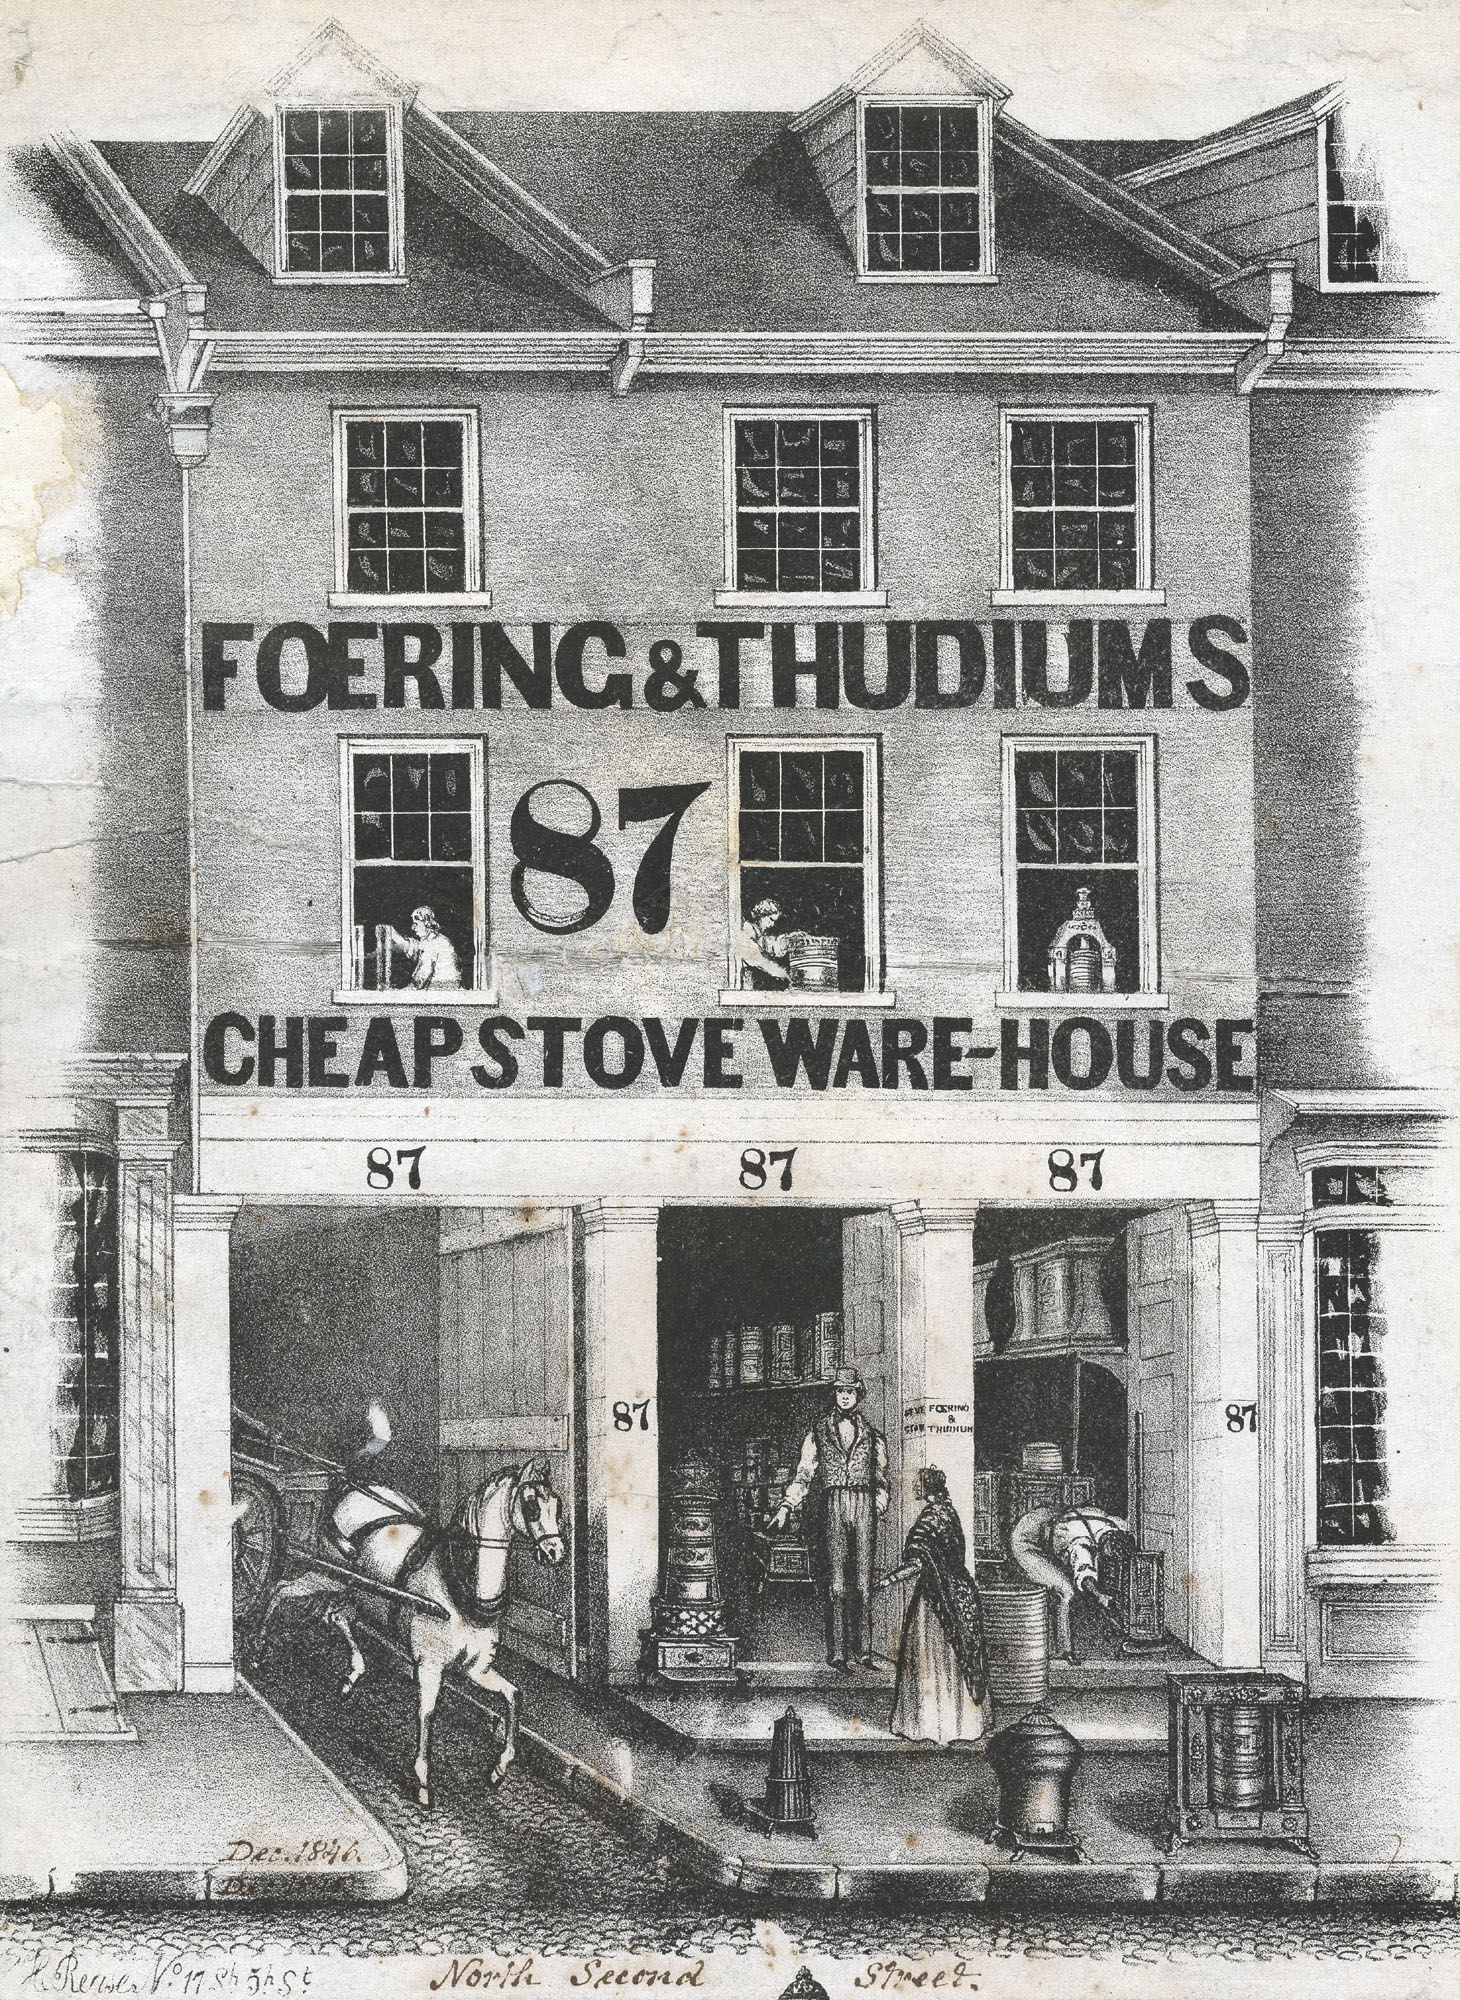 Foering & Thudiums cheap stove ware-house, [December 1846]